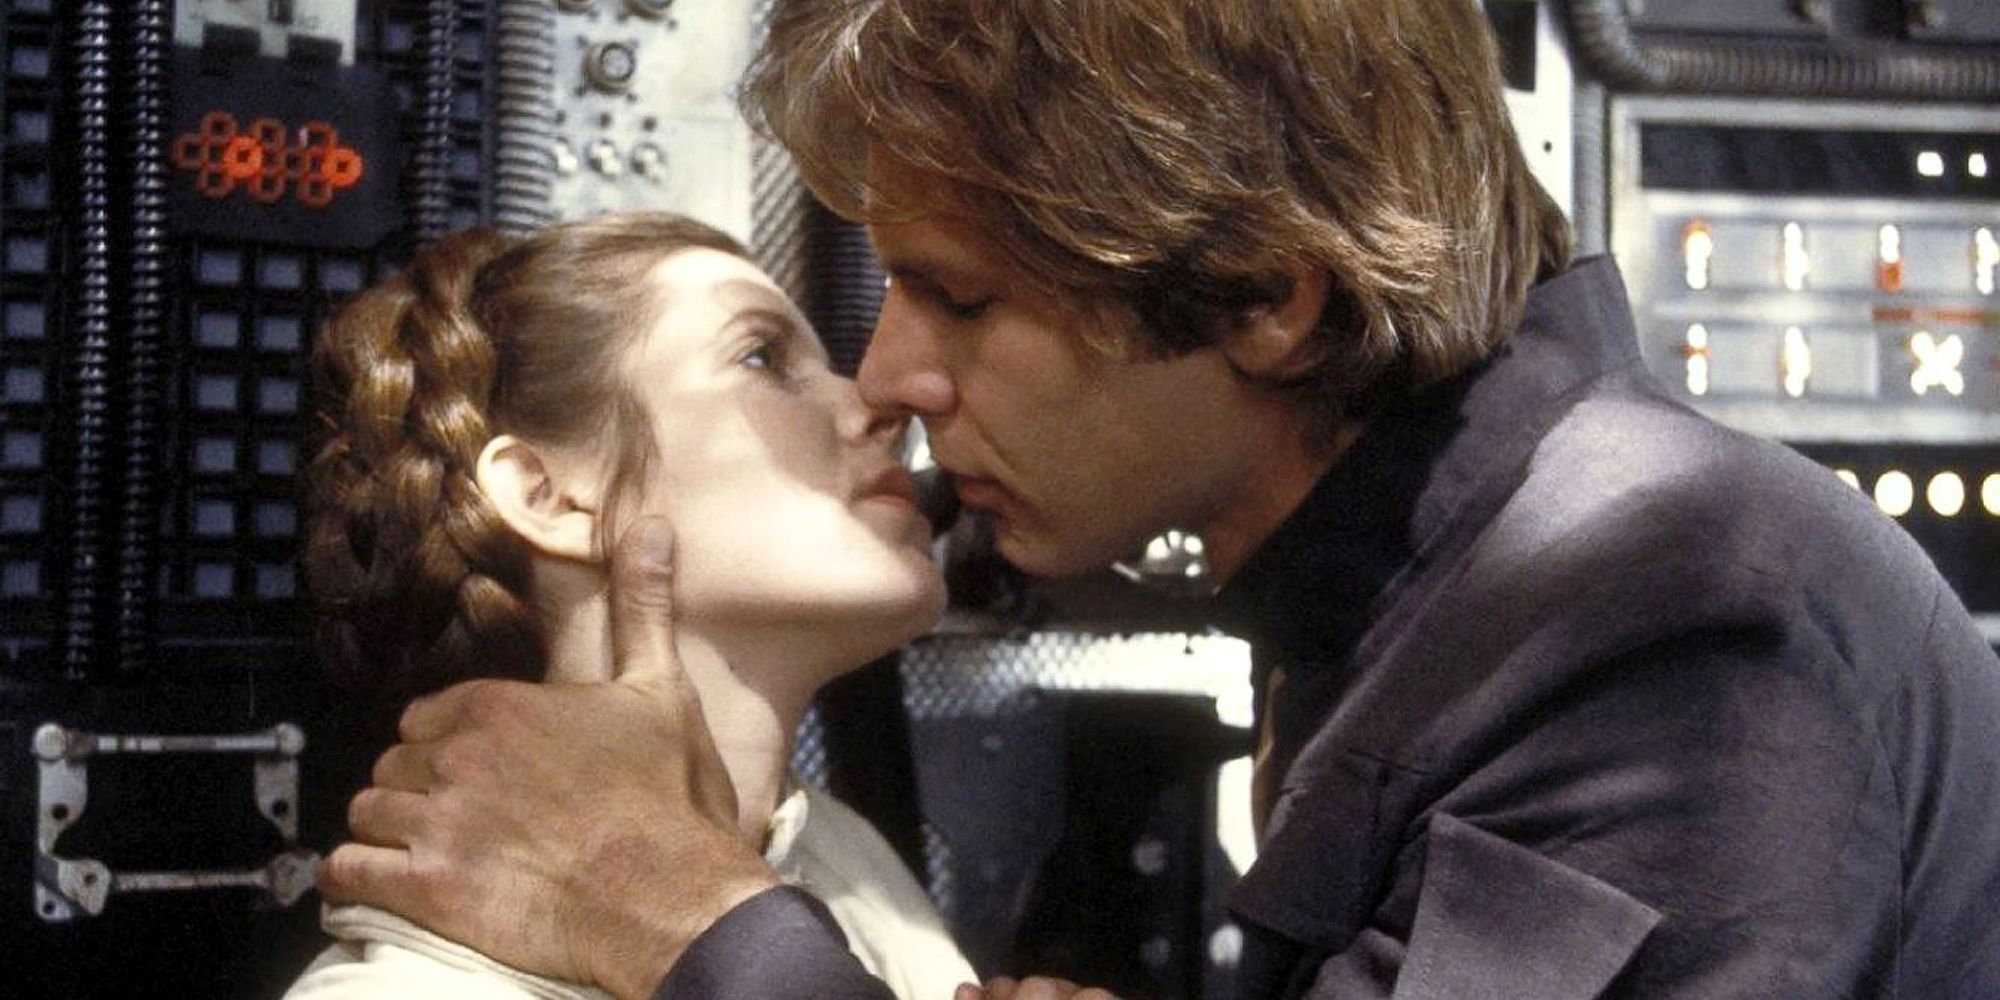 Star Wars Carrie Fisher Porn - Carrie Fisher Describes Kissing Harrison Ford on the Star Wars Set in 1976